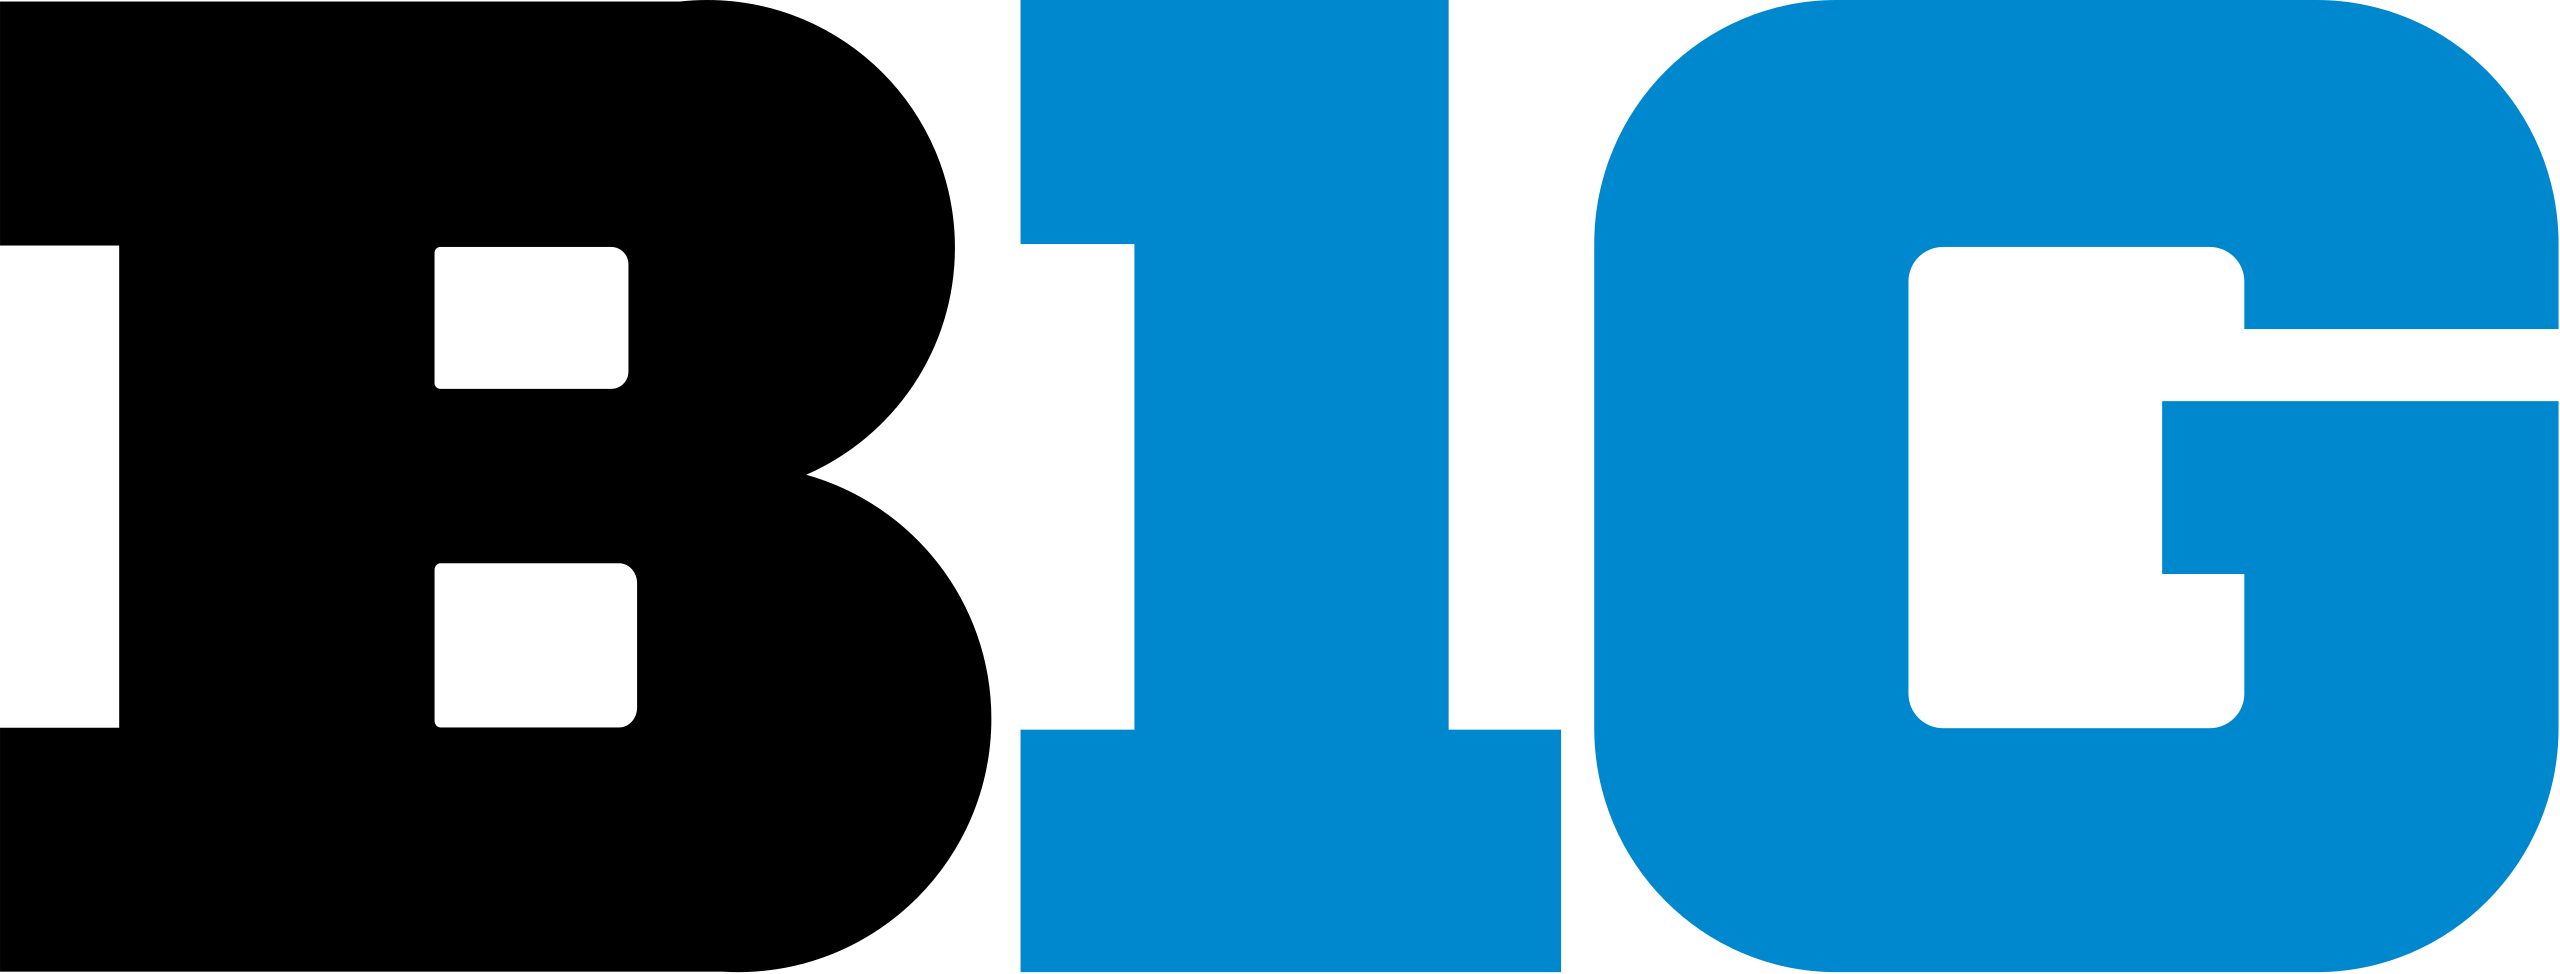 File:Big Ten Conference logo.svg - Wikimedia Commons